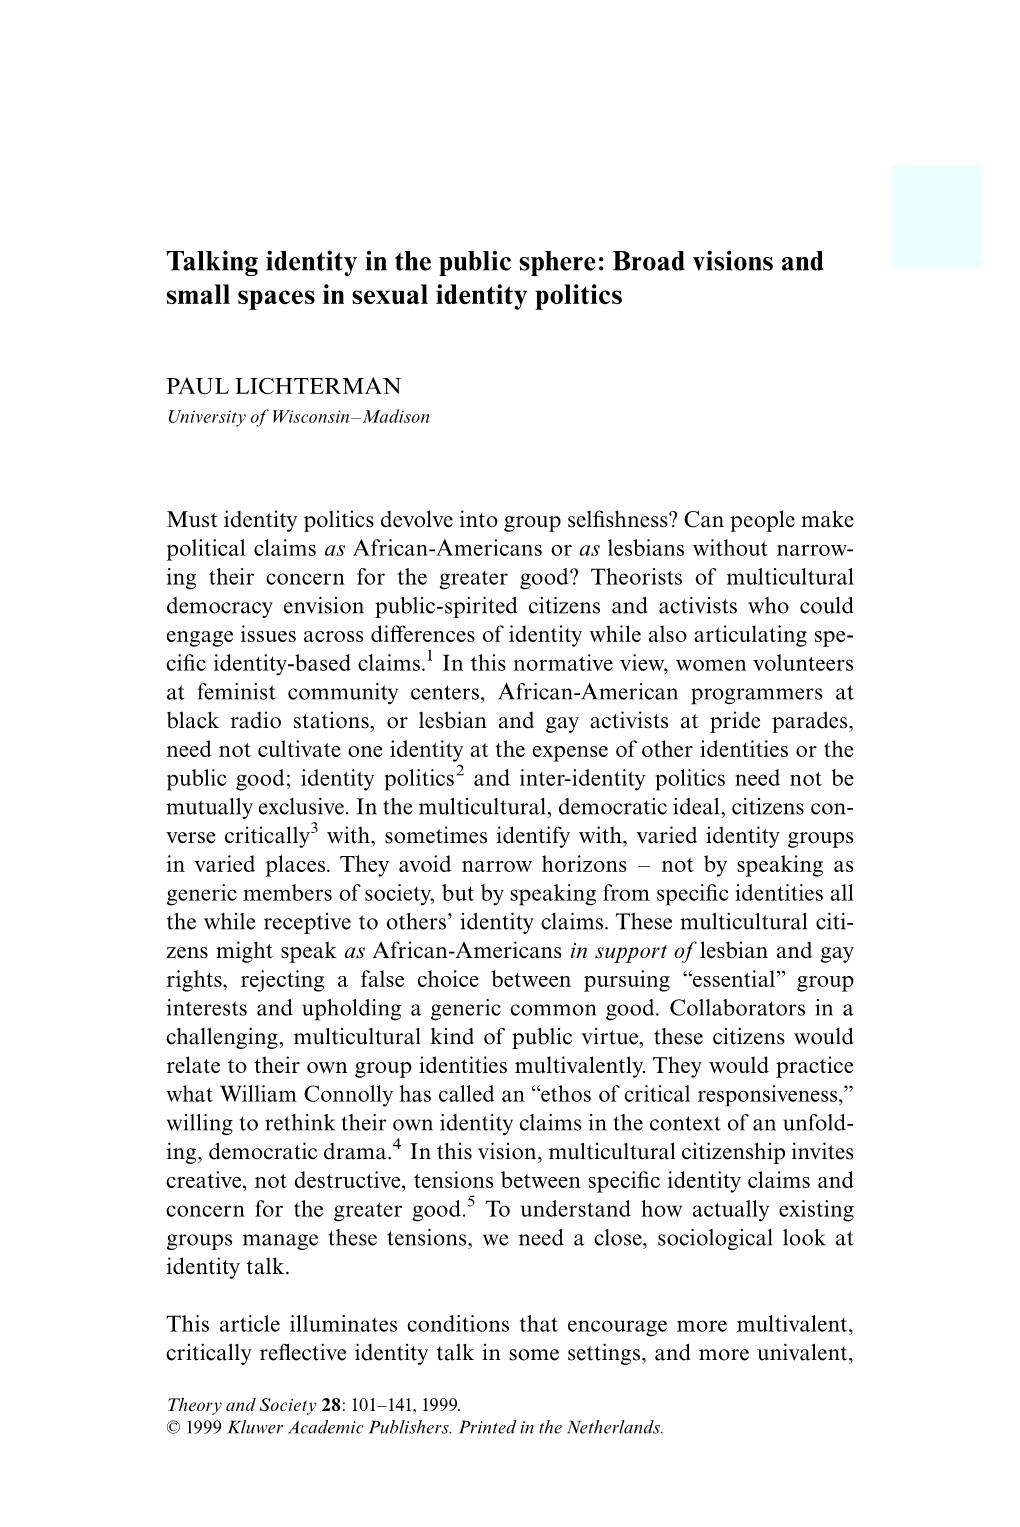 Talking Identity in the Public Sphere: Broad Visions and Small Spaces in Sexual Identity Politics